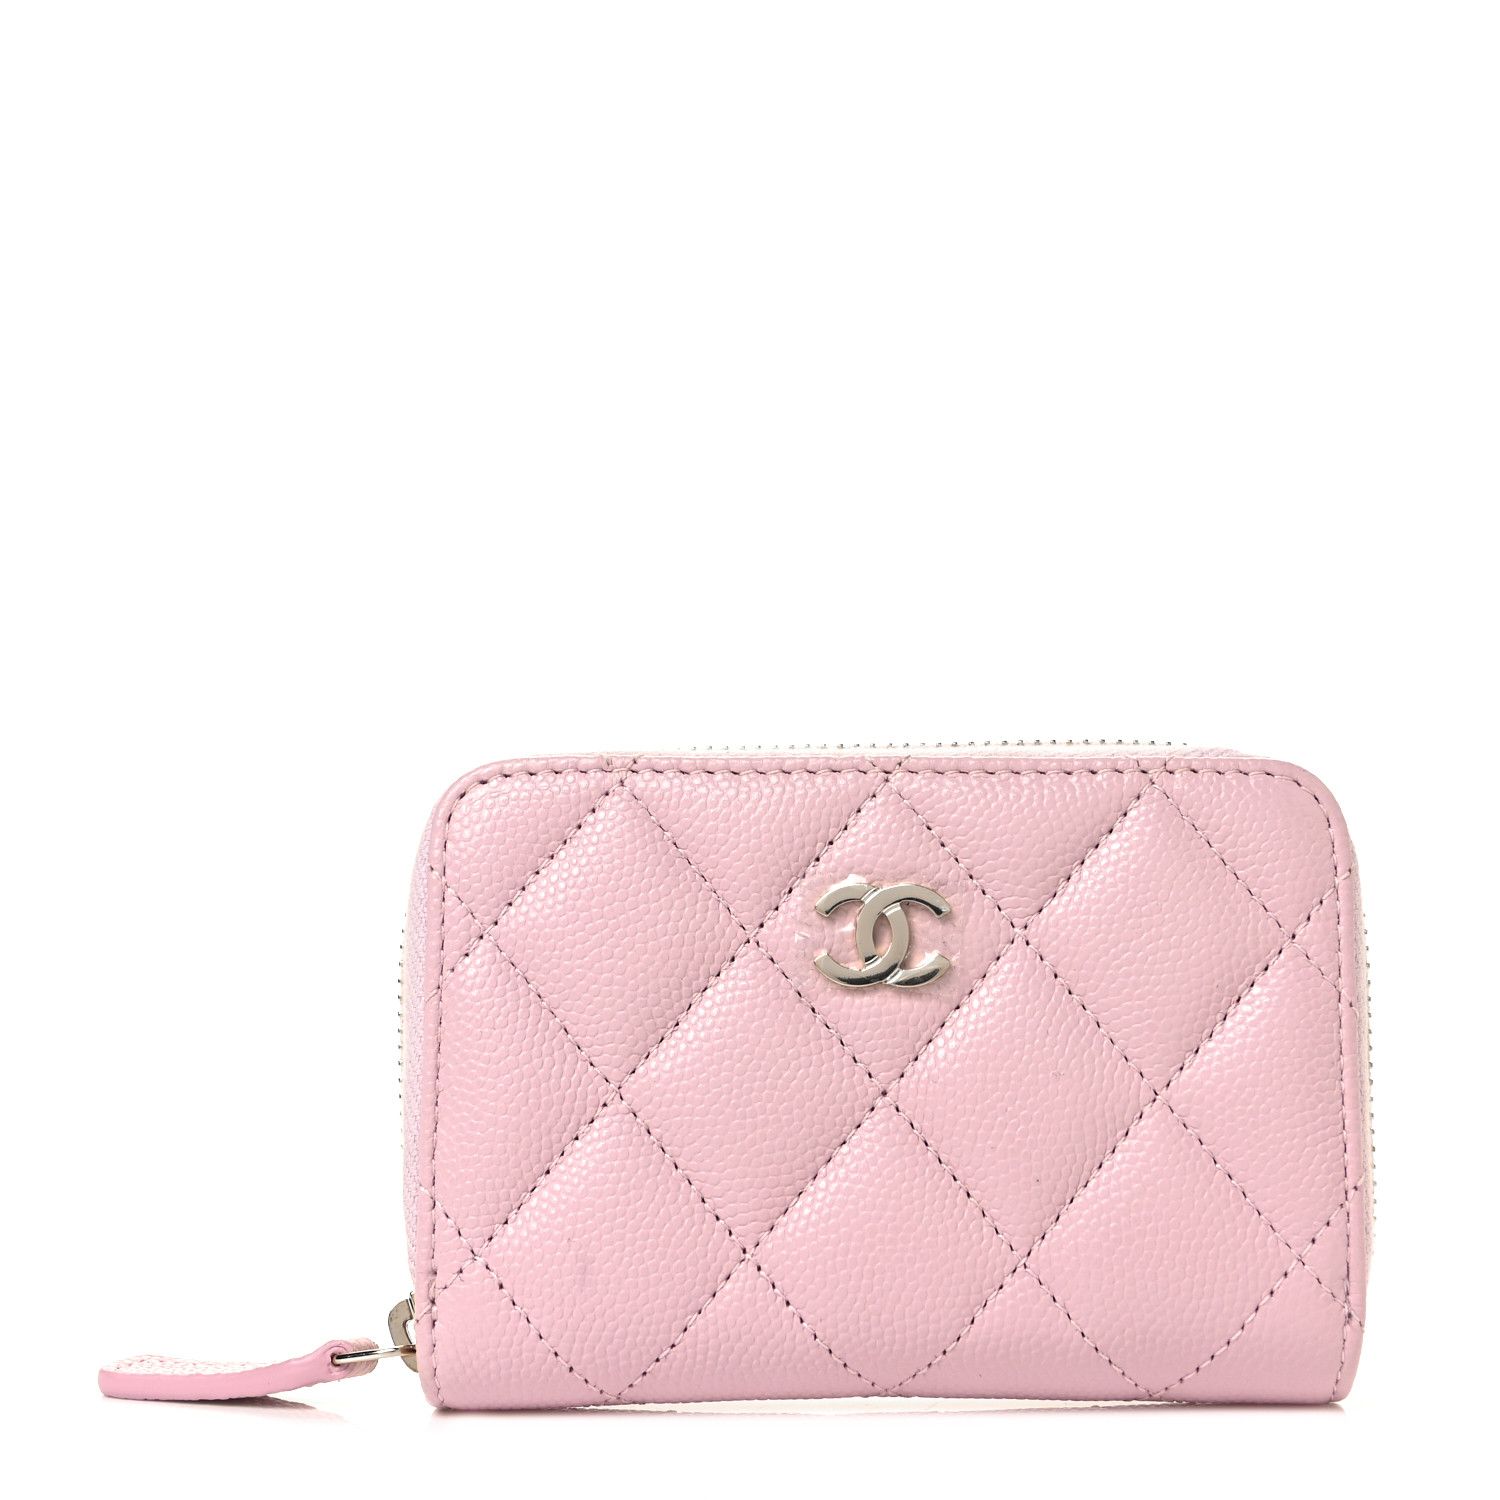 CHANEL Caviar Quilted Zip Coin Purse Light Pink | FASHIONPHILE | Fashionphile